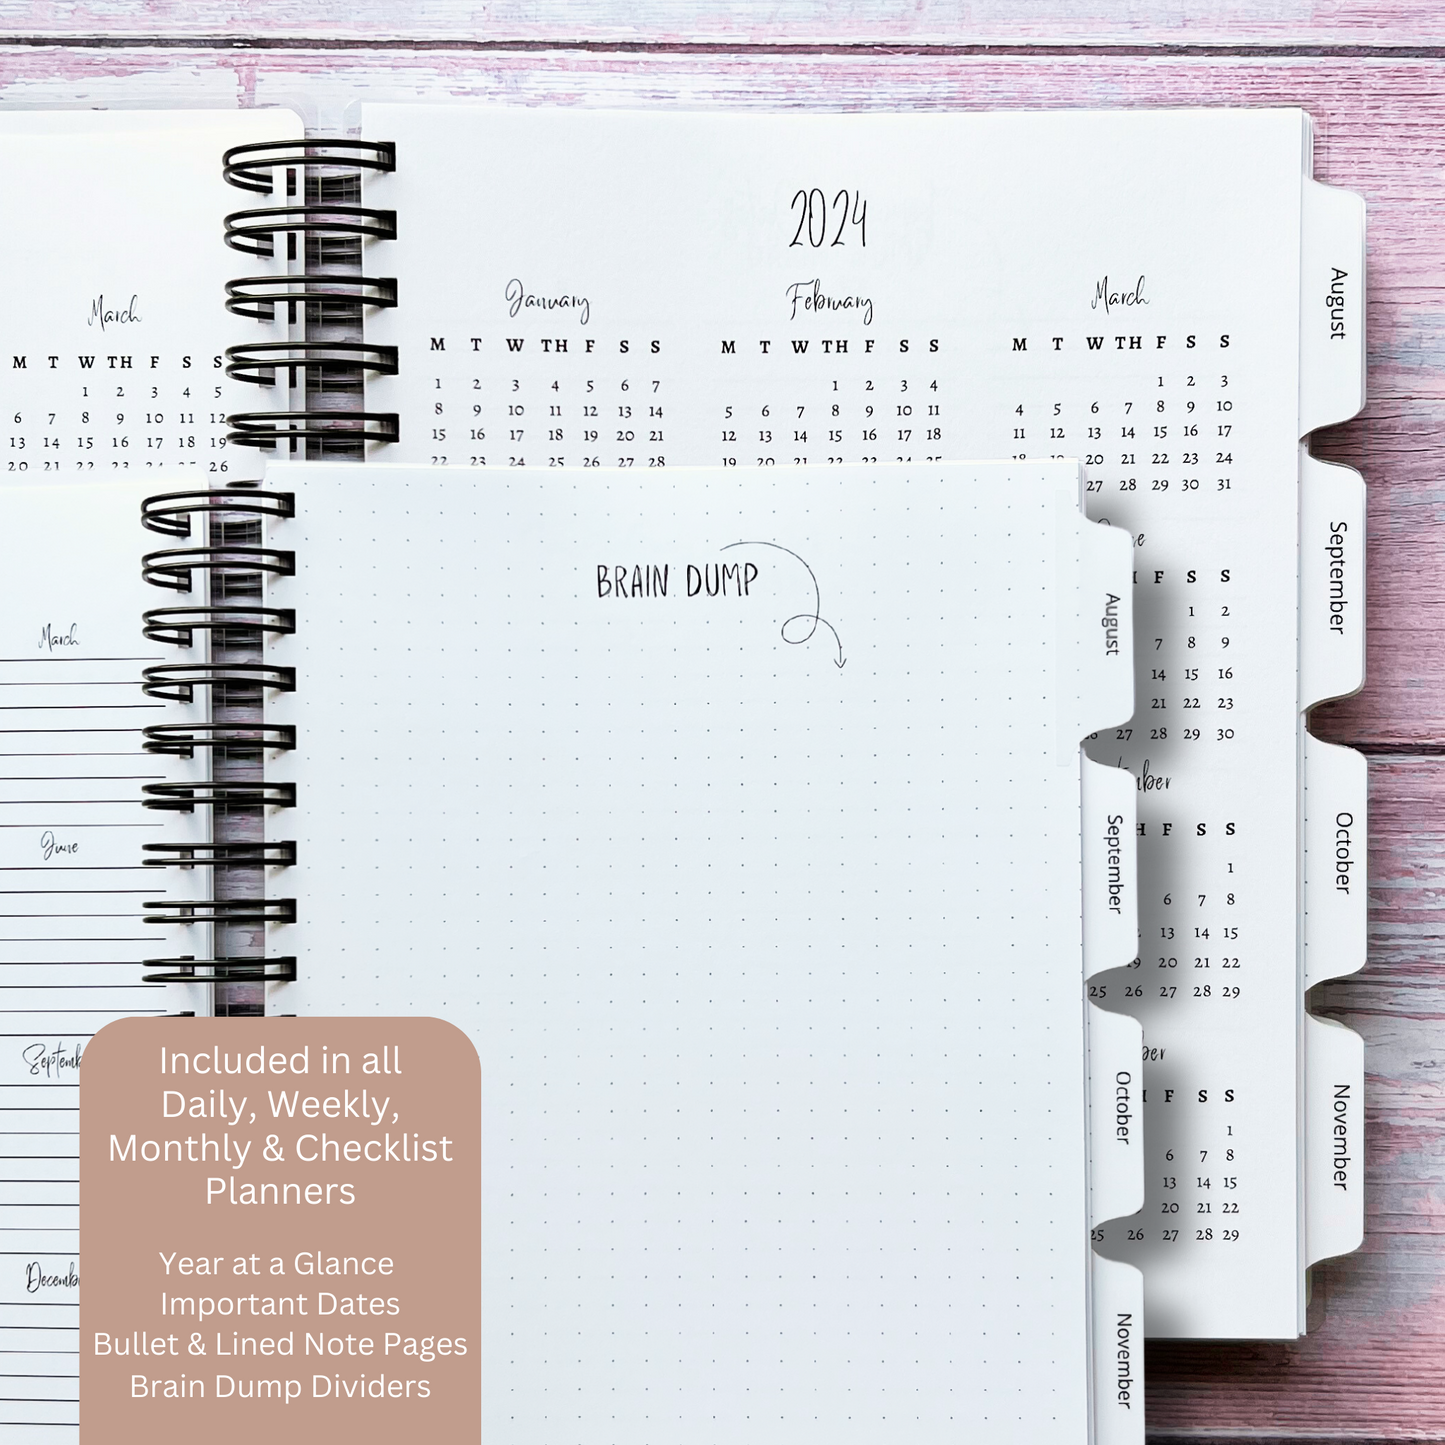 Personalized Monthly Planner - Boho Sunflowers